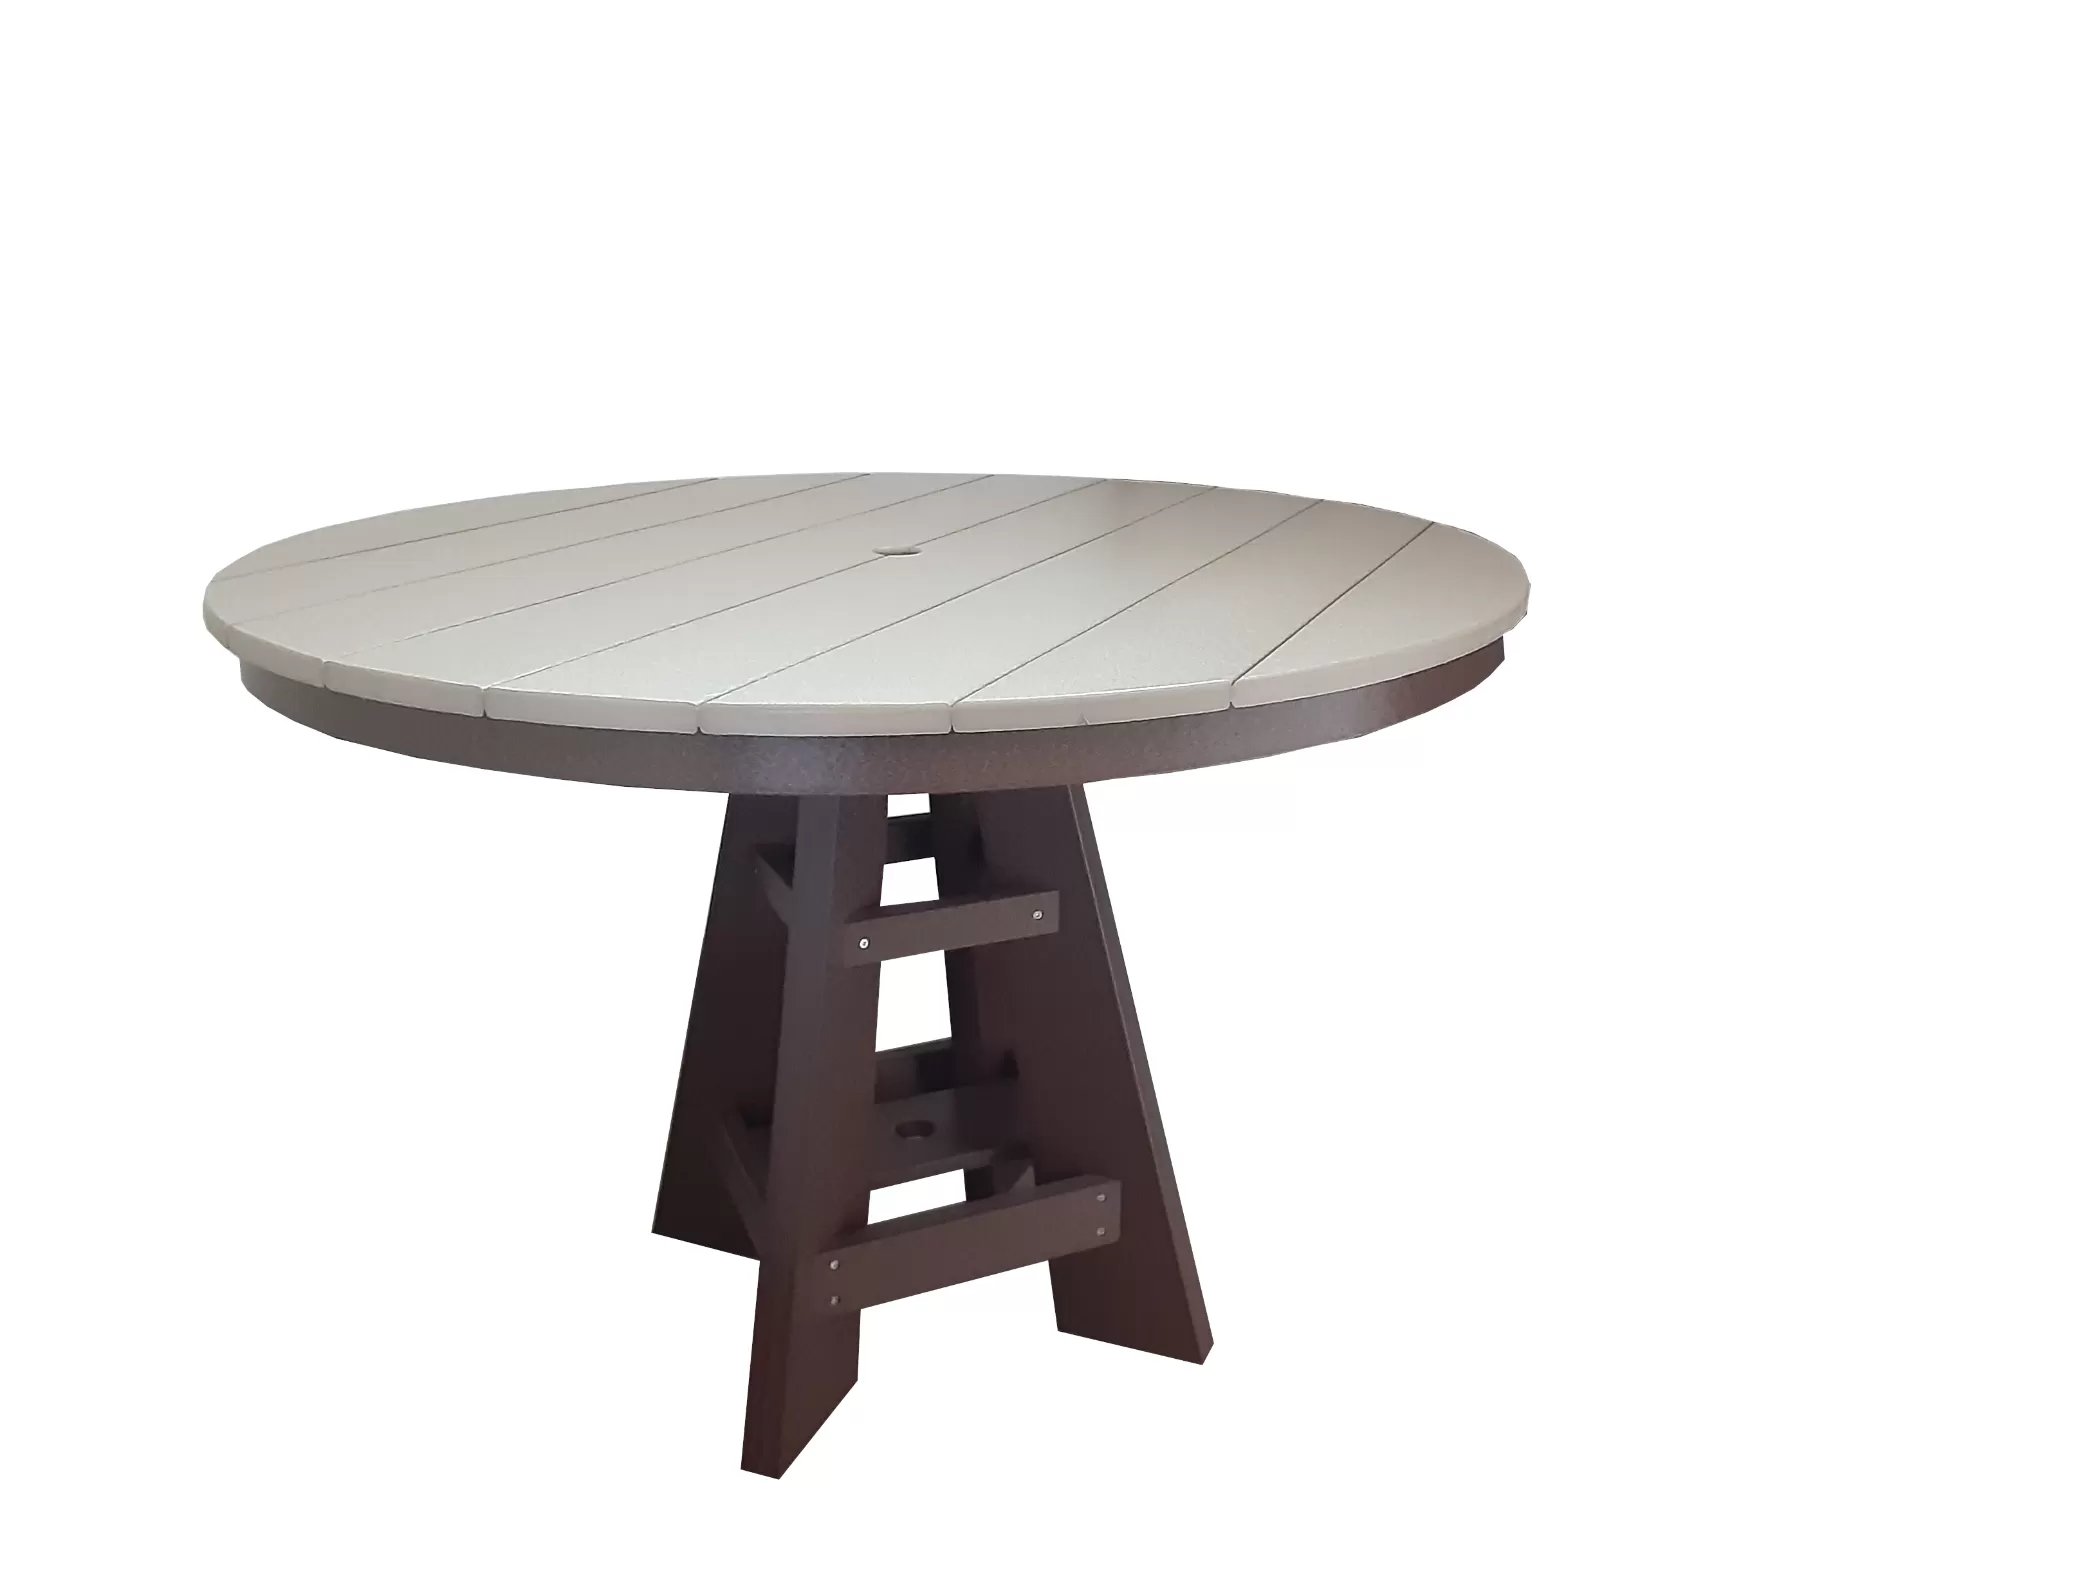 44" Round Standard Dining Table